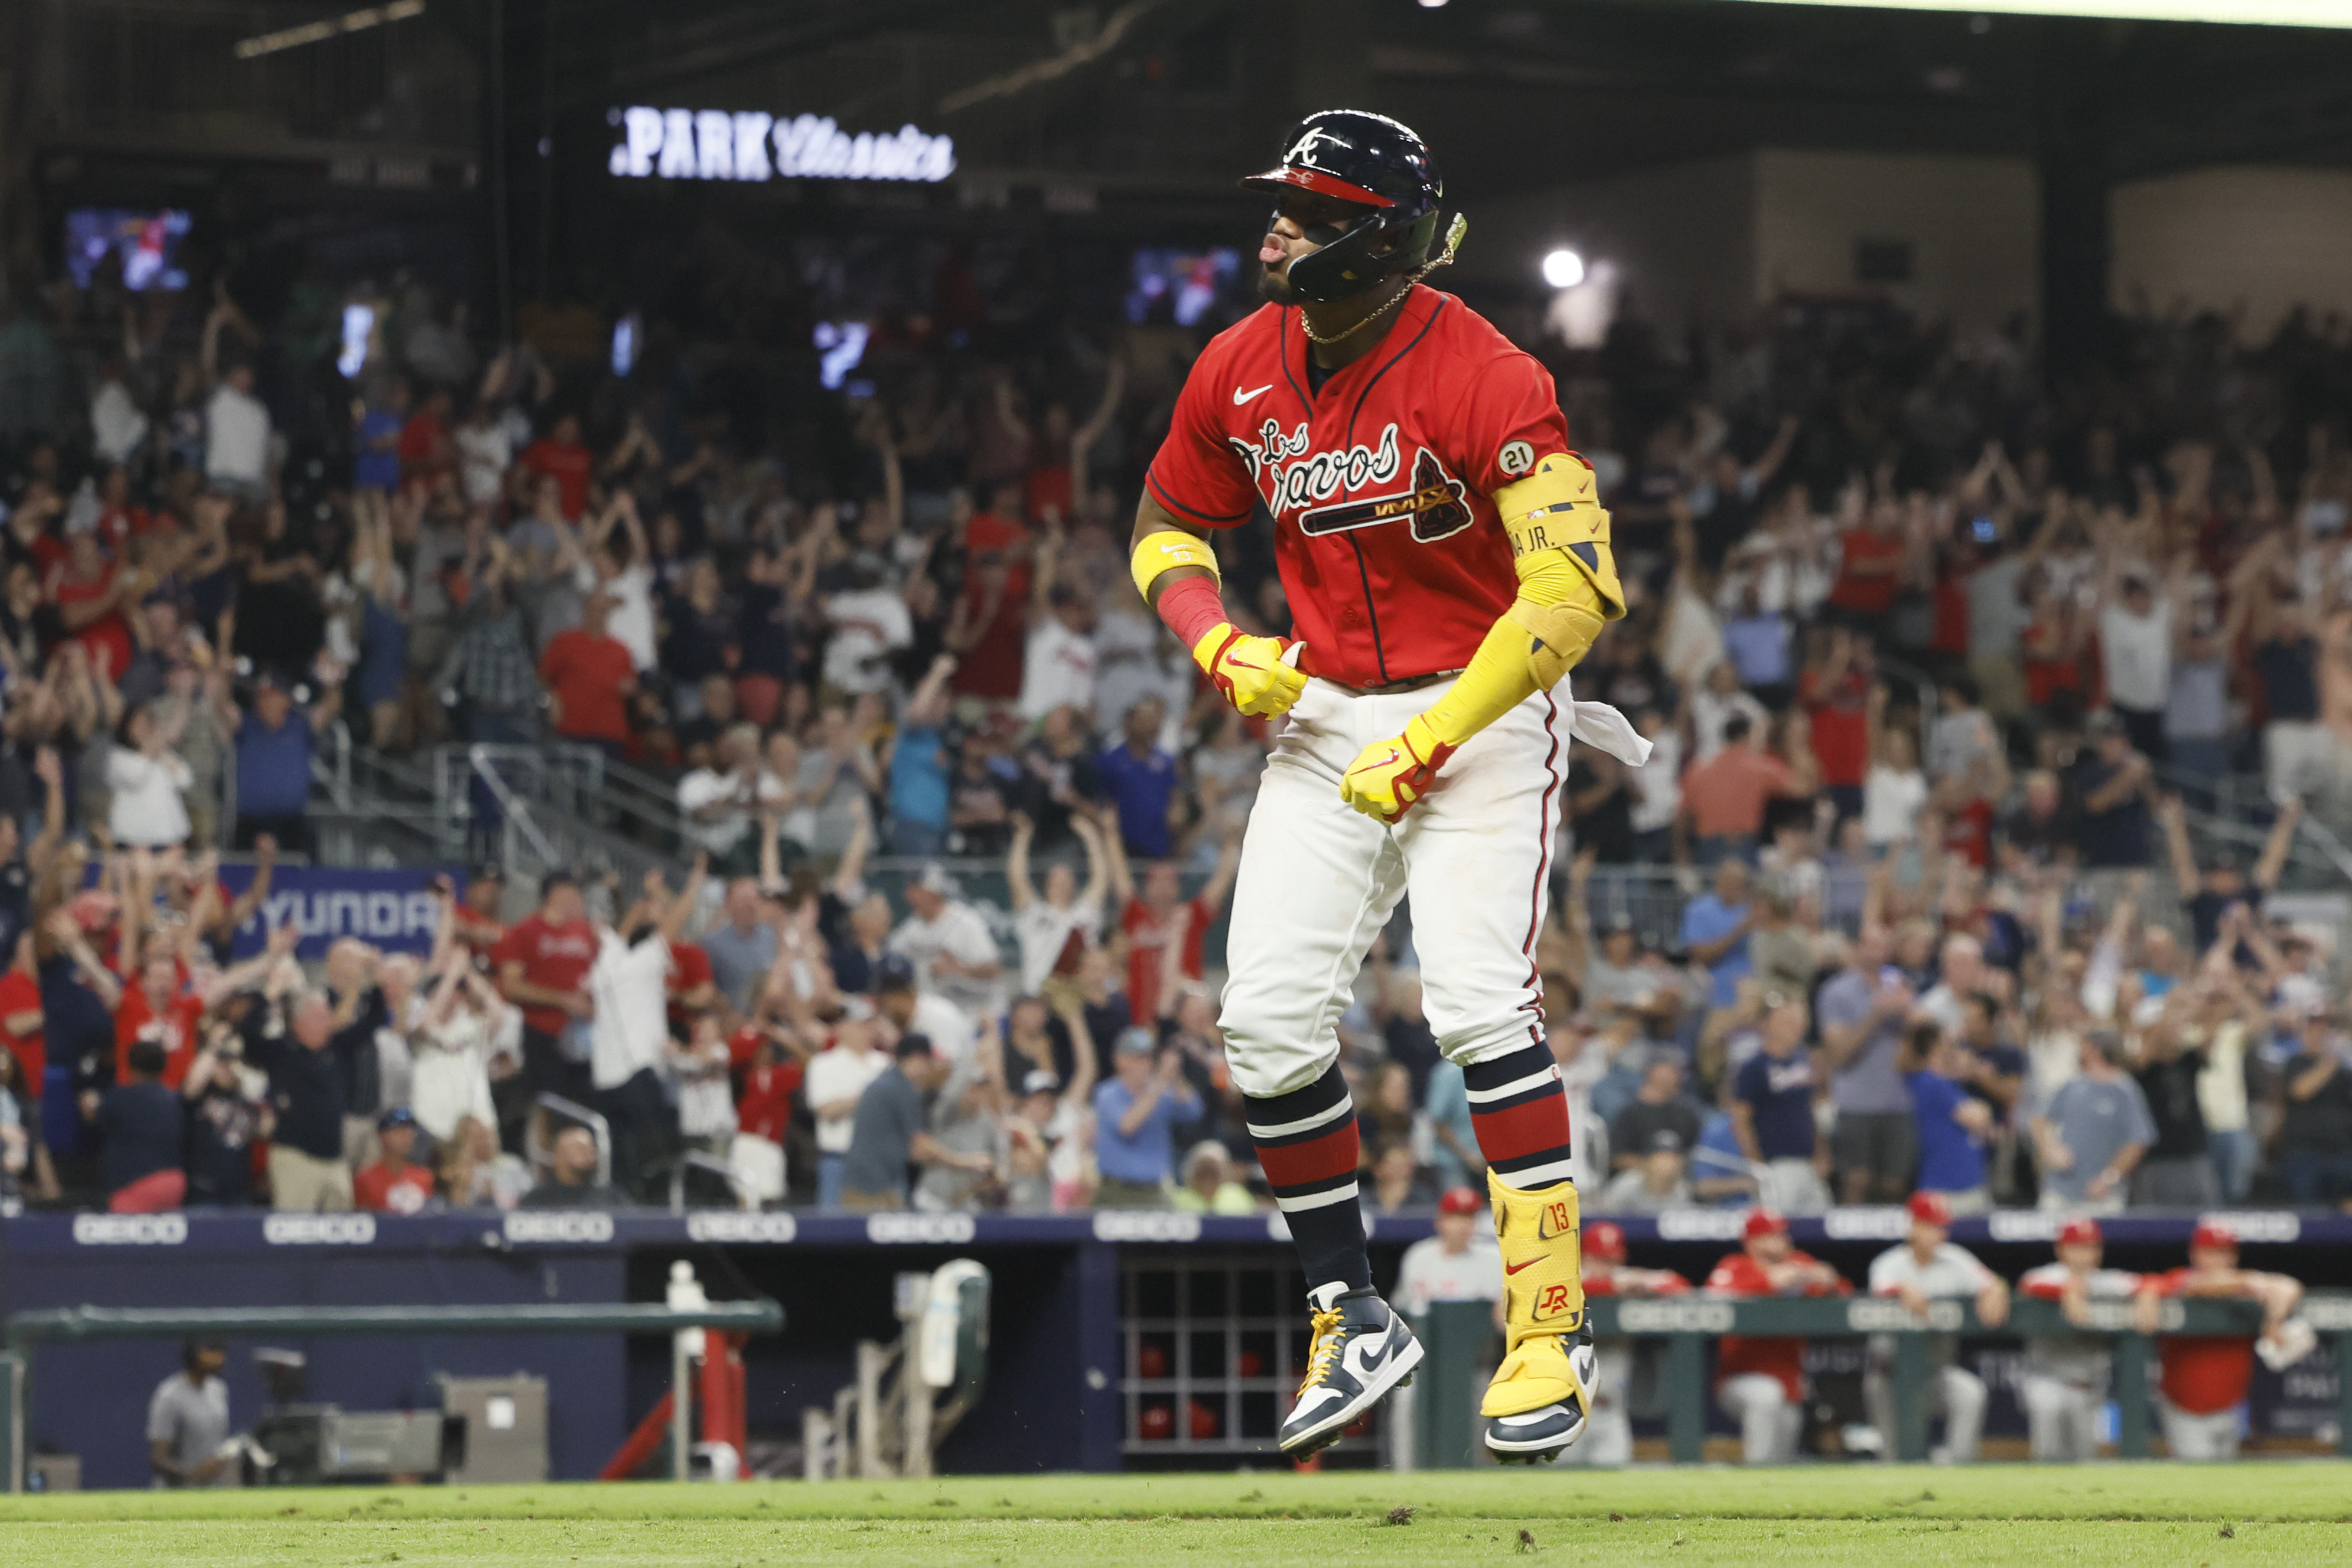 Atlanta Braves Clinch NL East! Phillies Manager RIPS Ronald Acuña